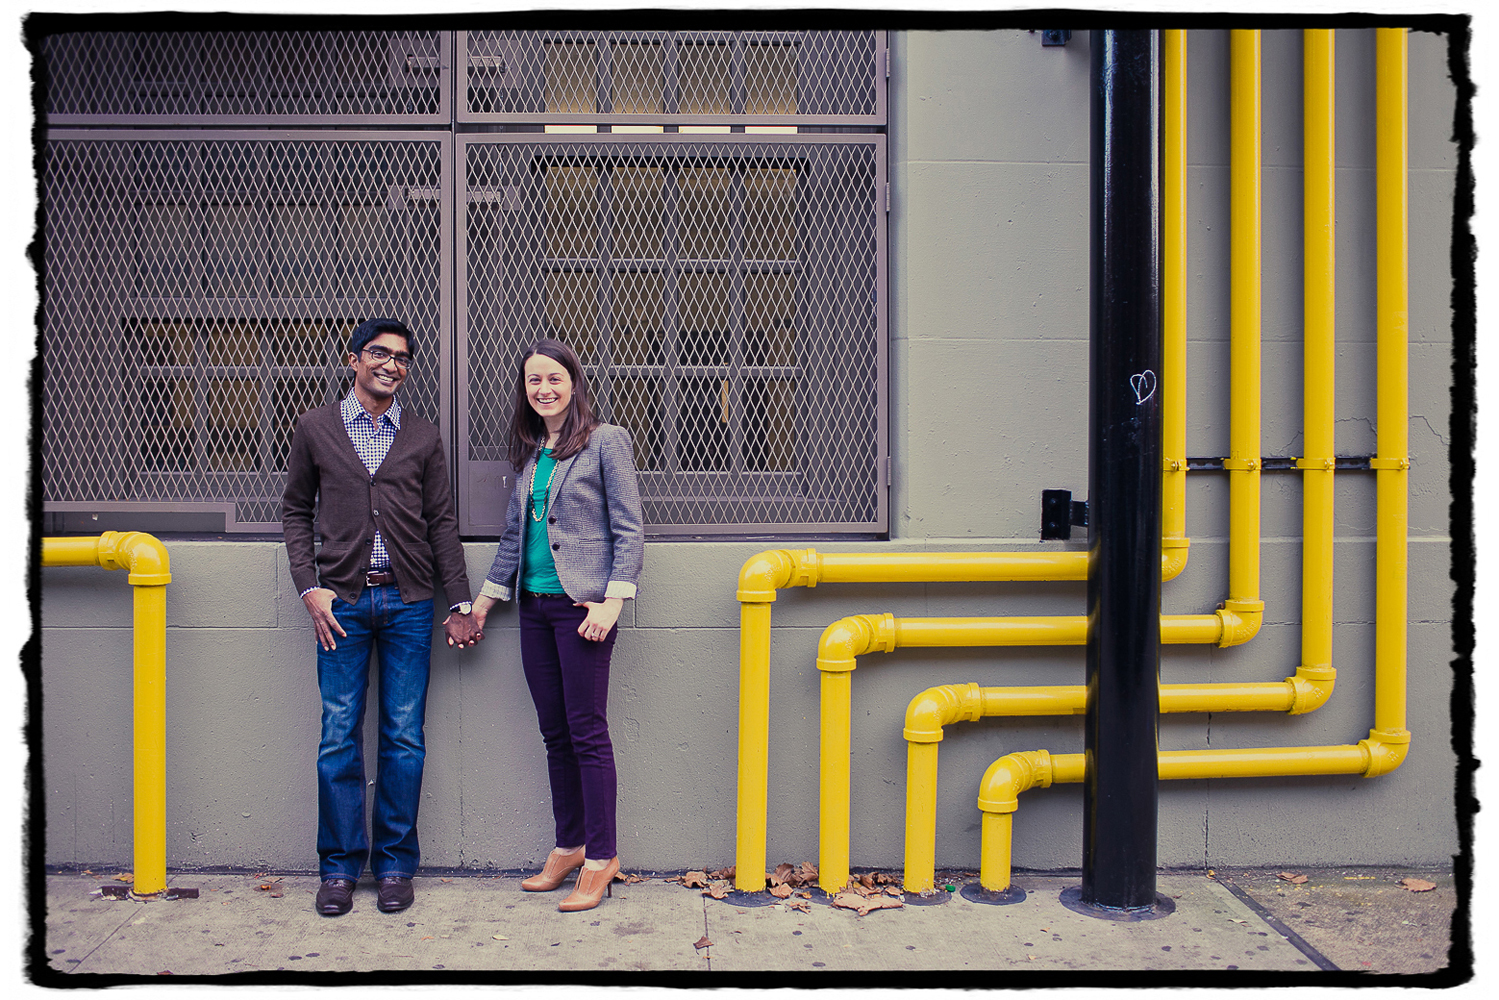 Engagement Portraits: Katie & Sharmilan on the streets of Chelsea.